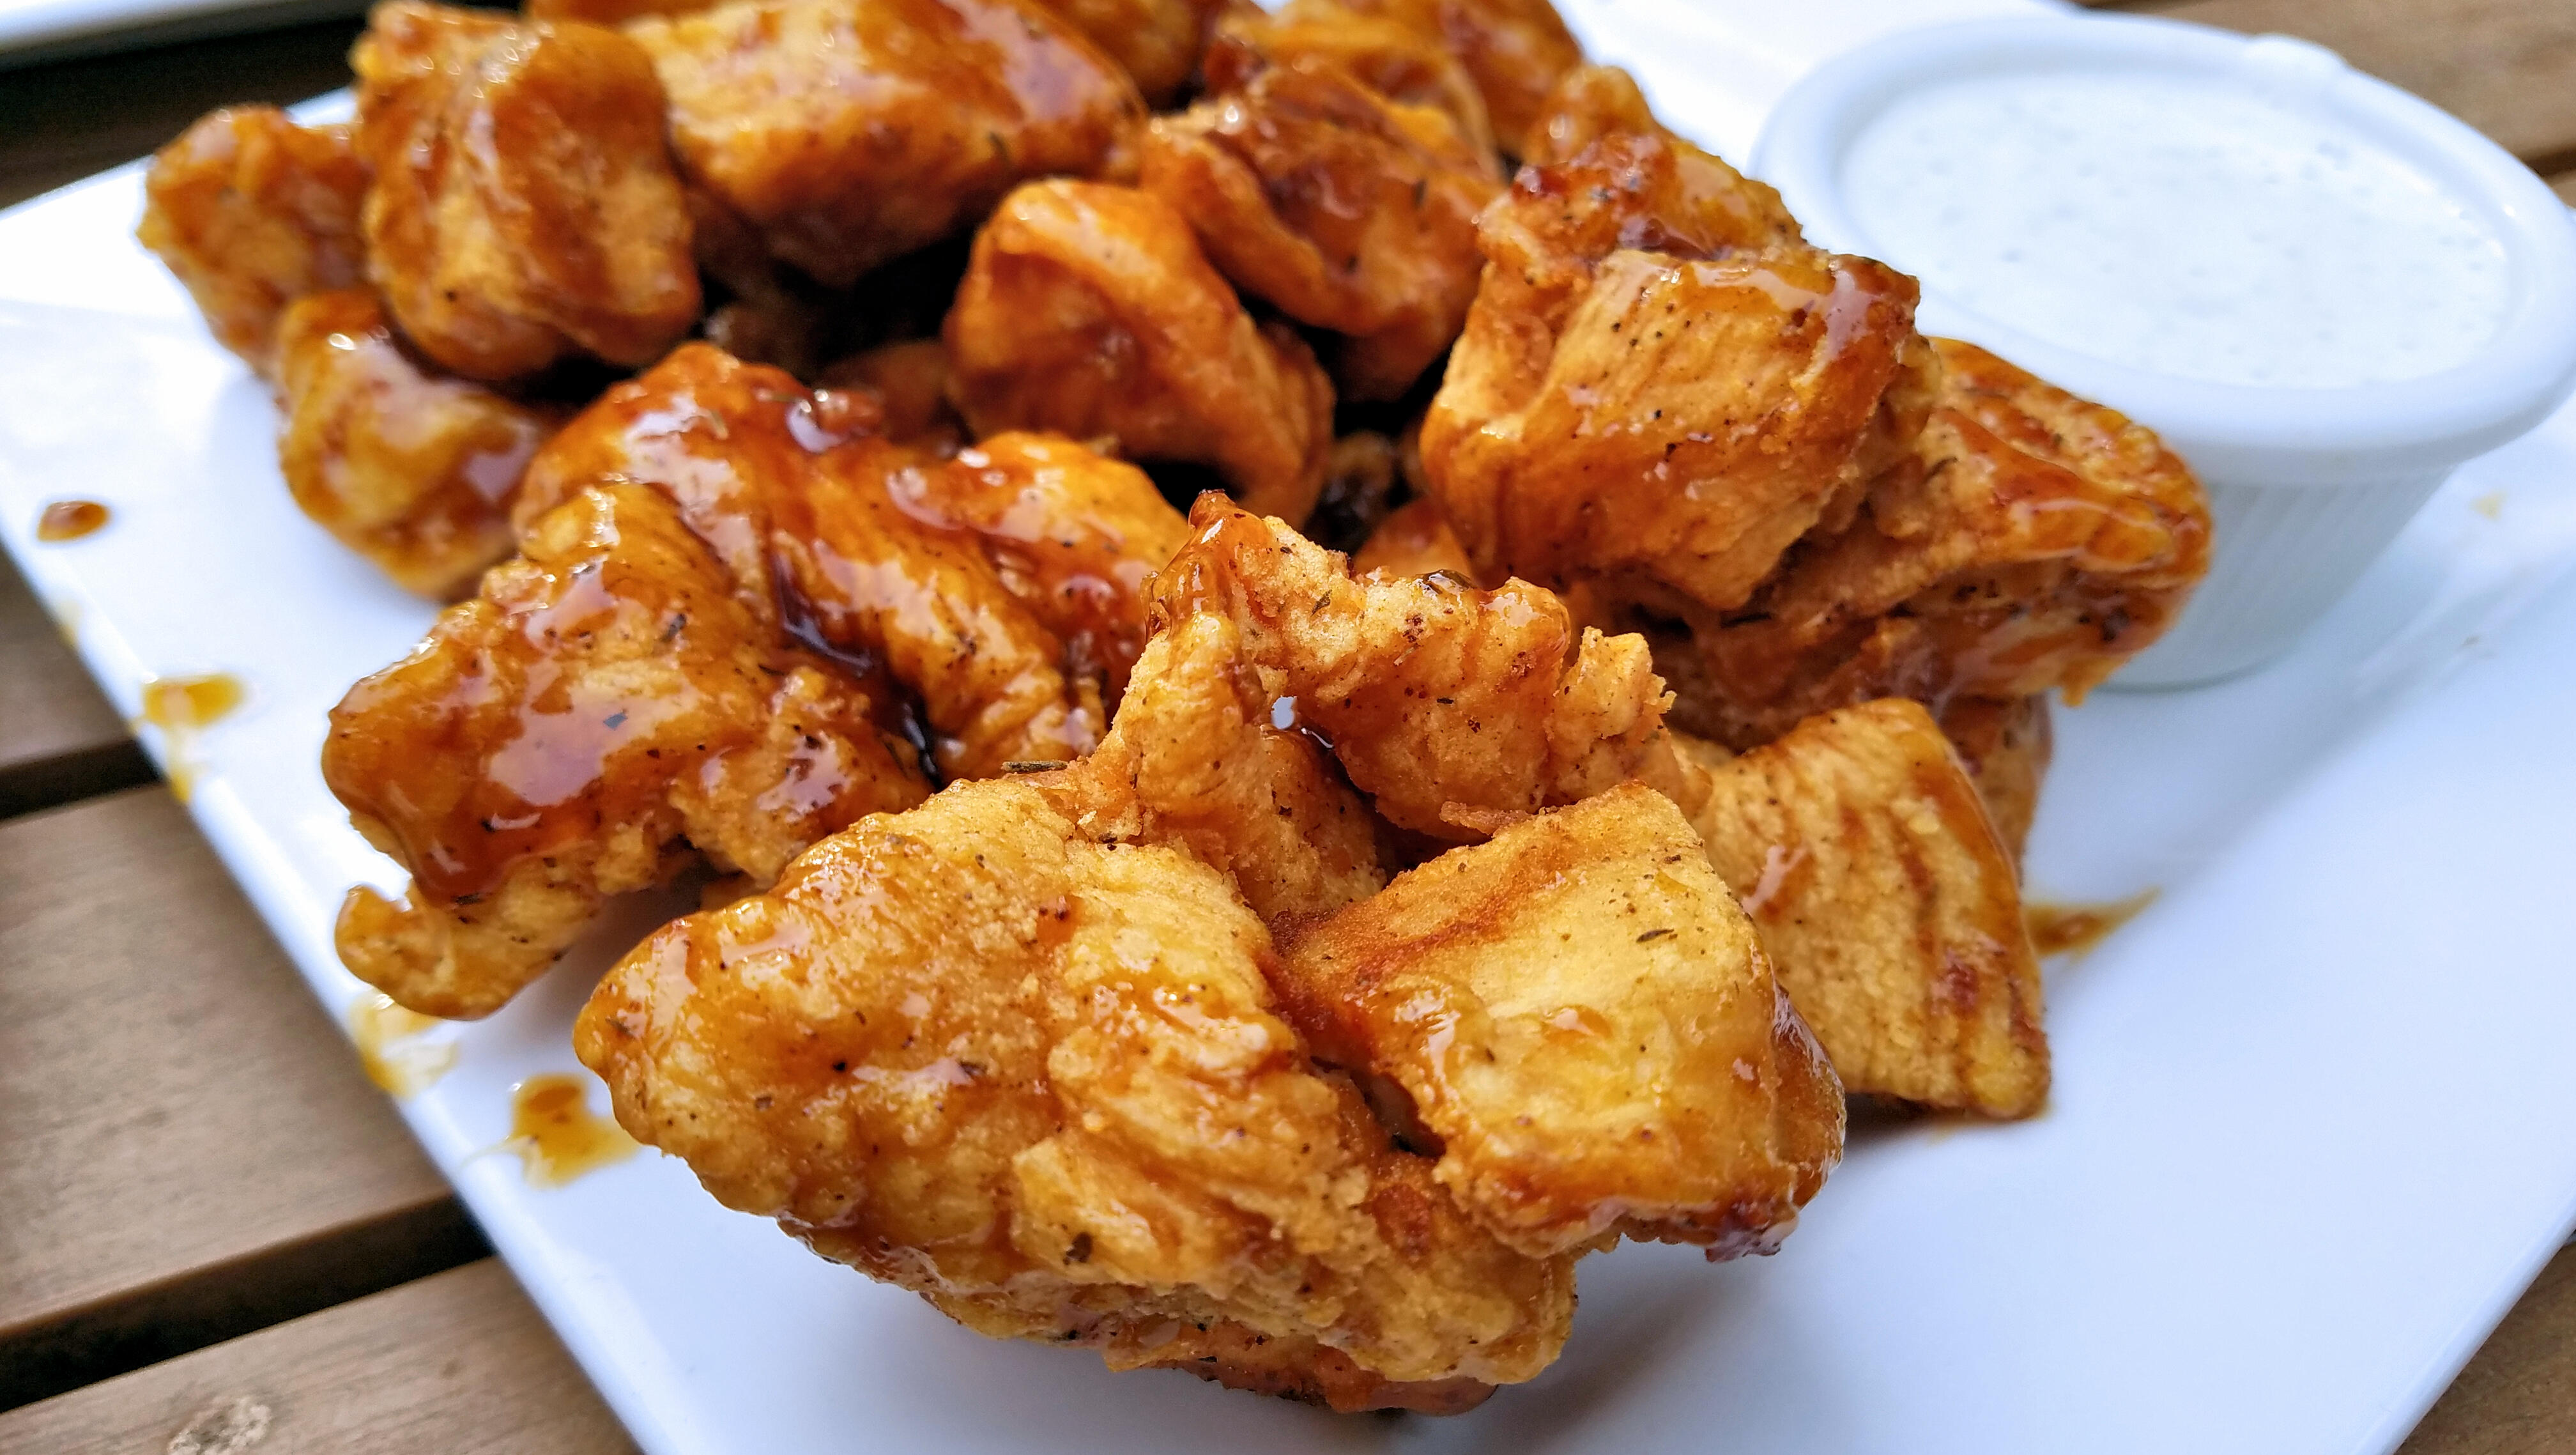 Court Ruling: Boneless Wings Can Have Bones